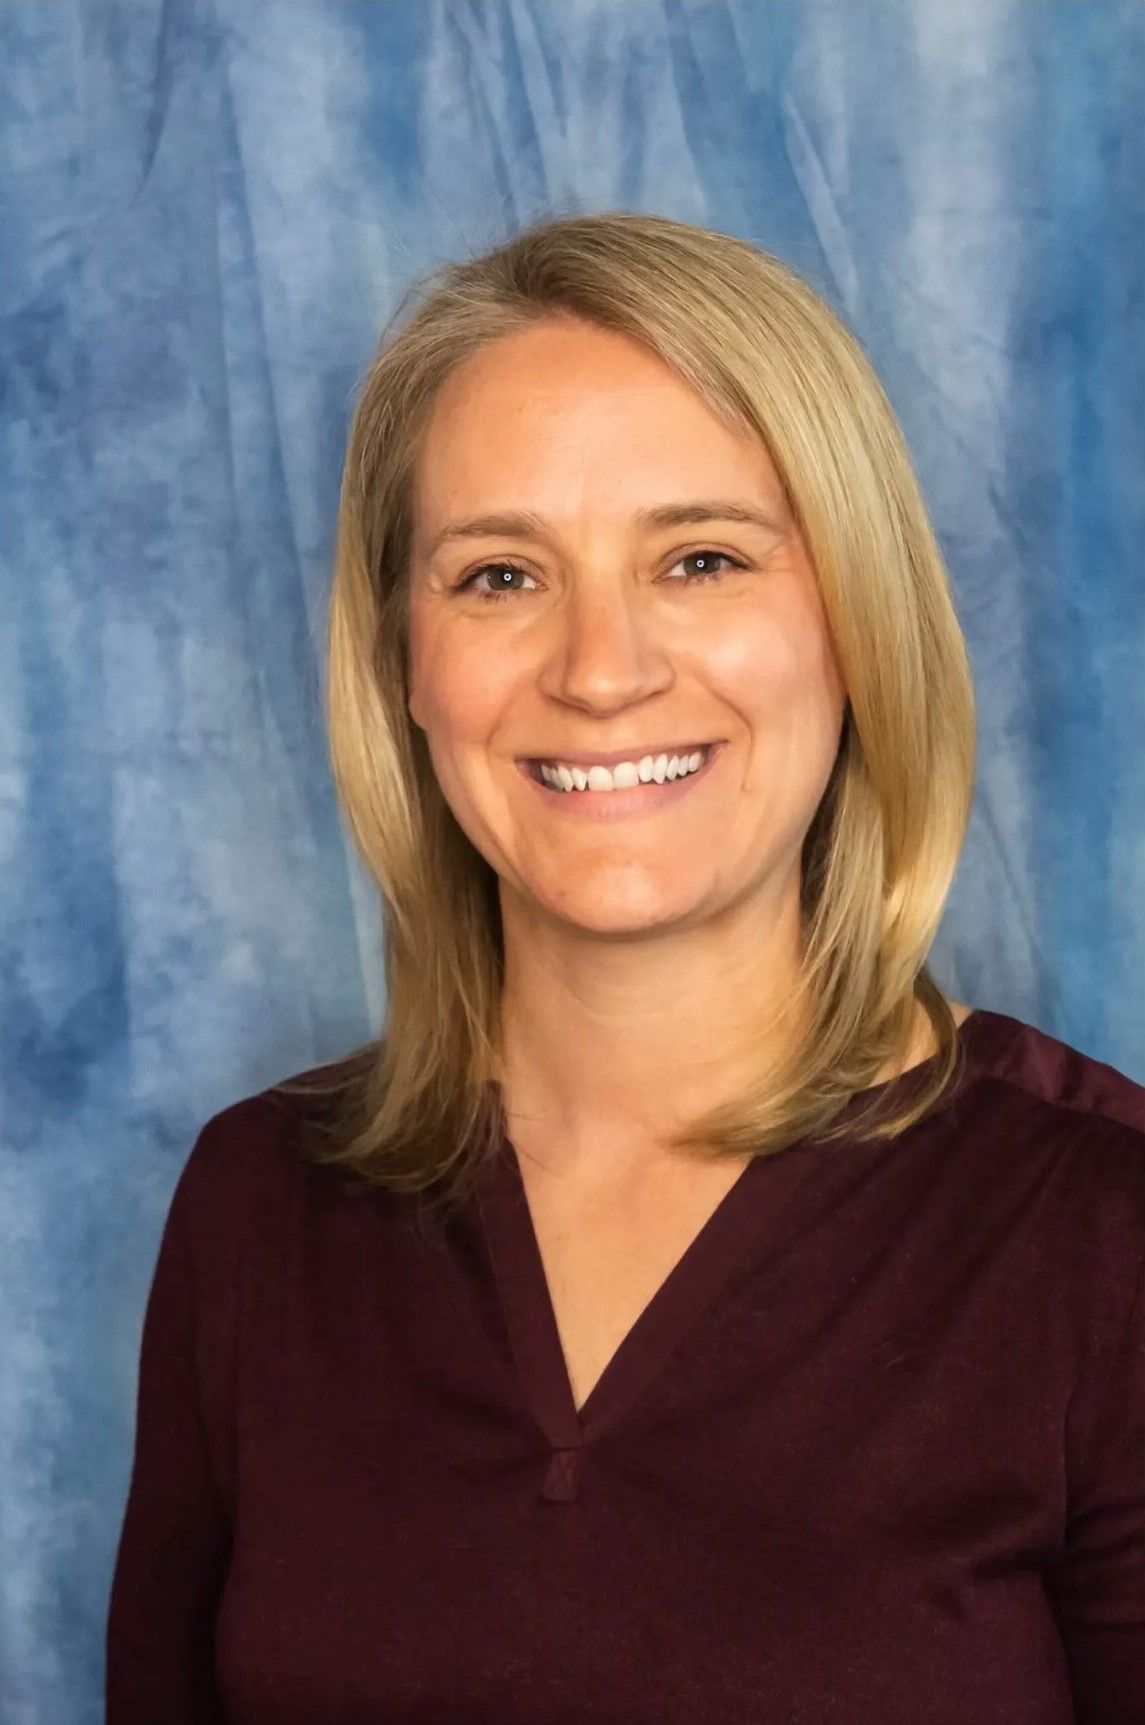 Obgyn Manchester NH — Melissa Culverwell, MSN, APRN, NP-C in Manchester, NH